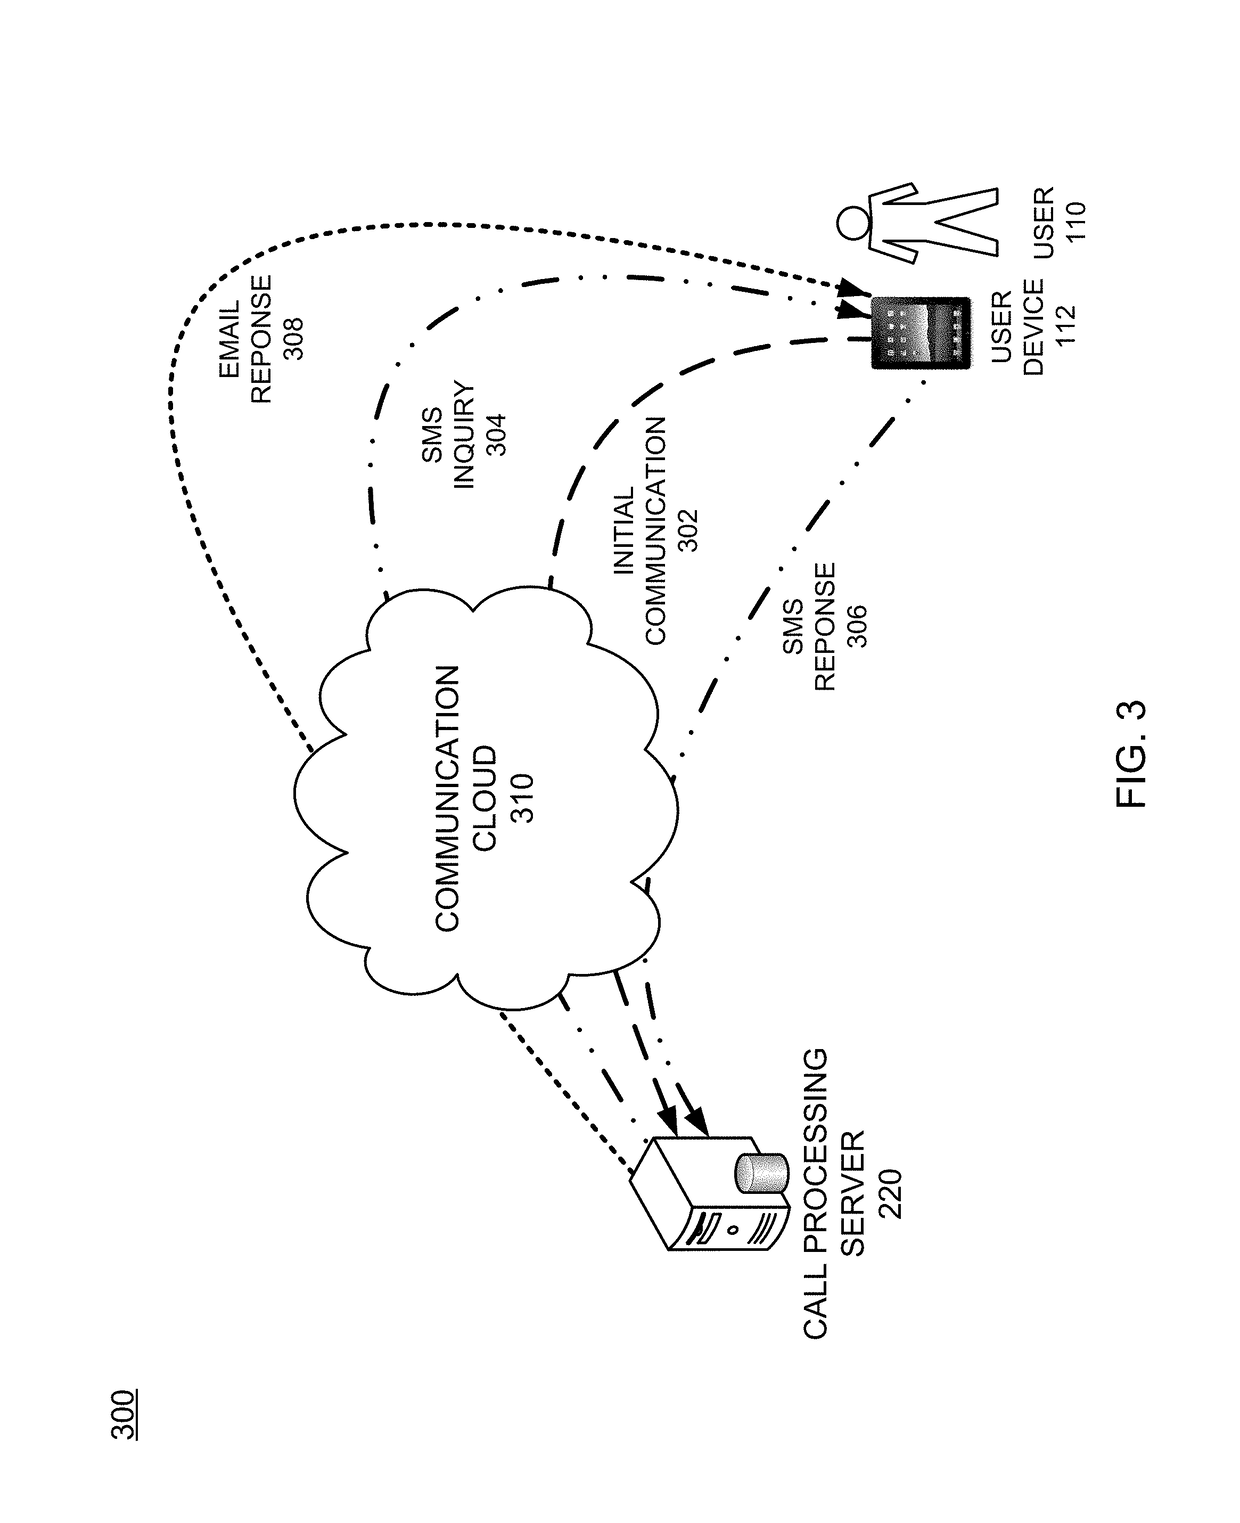 Multimode service communication configuration for performing transactions